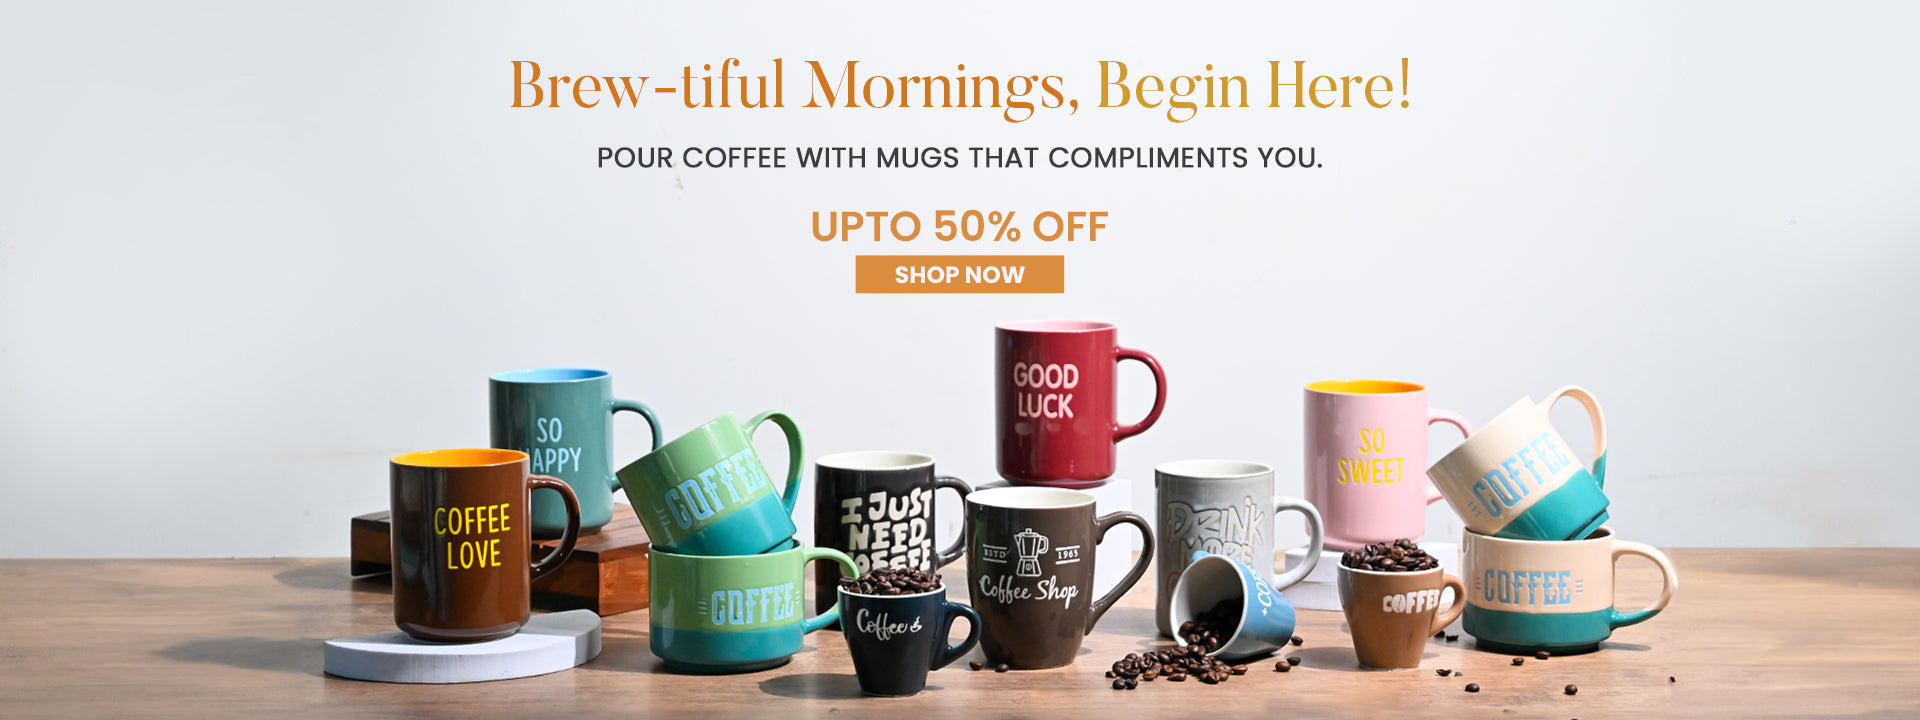 Brew-tiful Mornings, Begin Here! - Pour Coffee